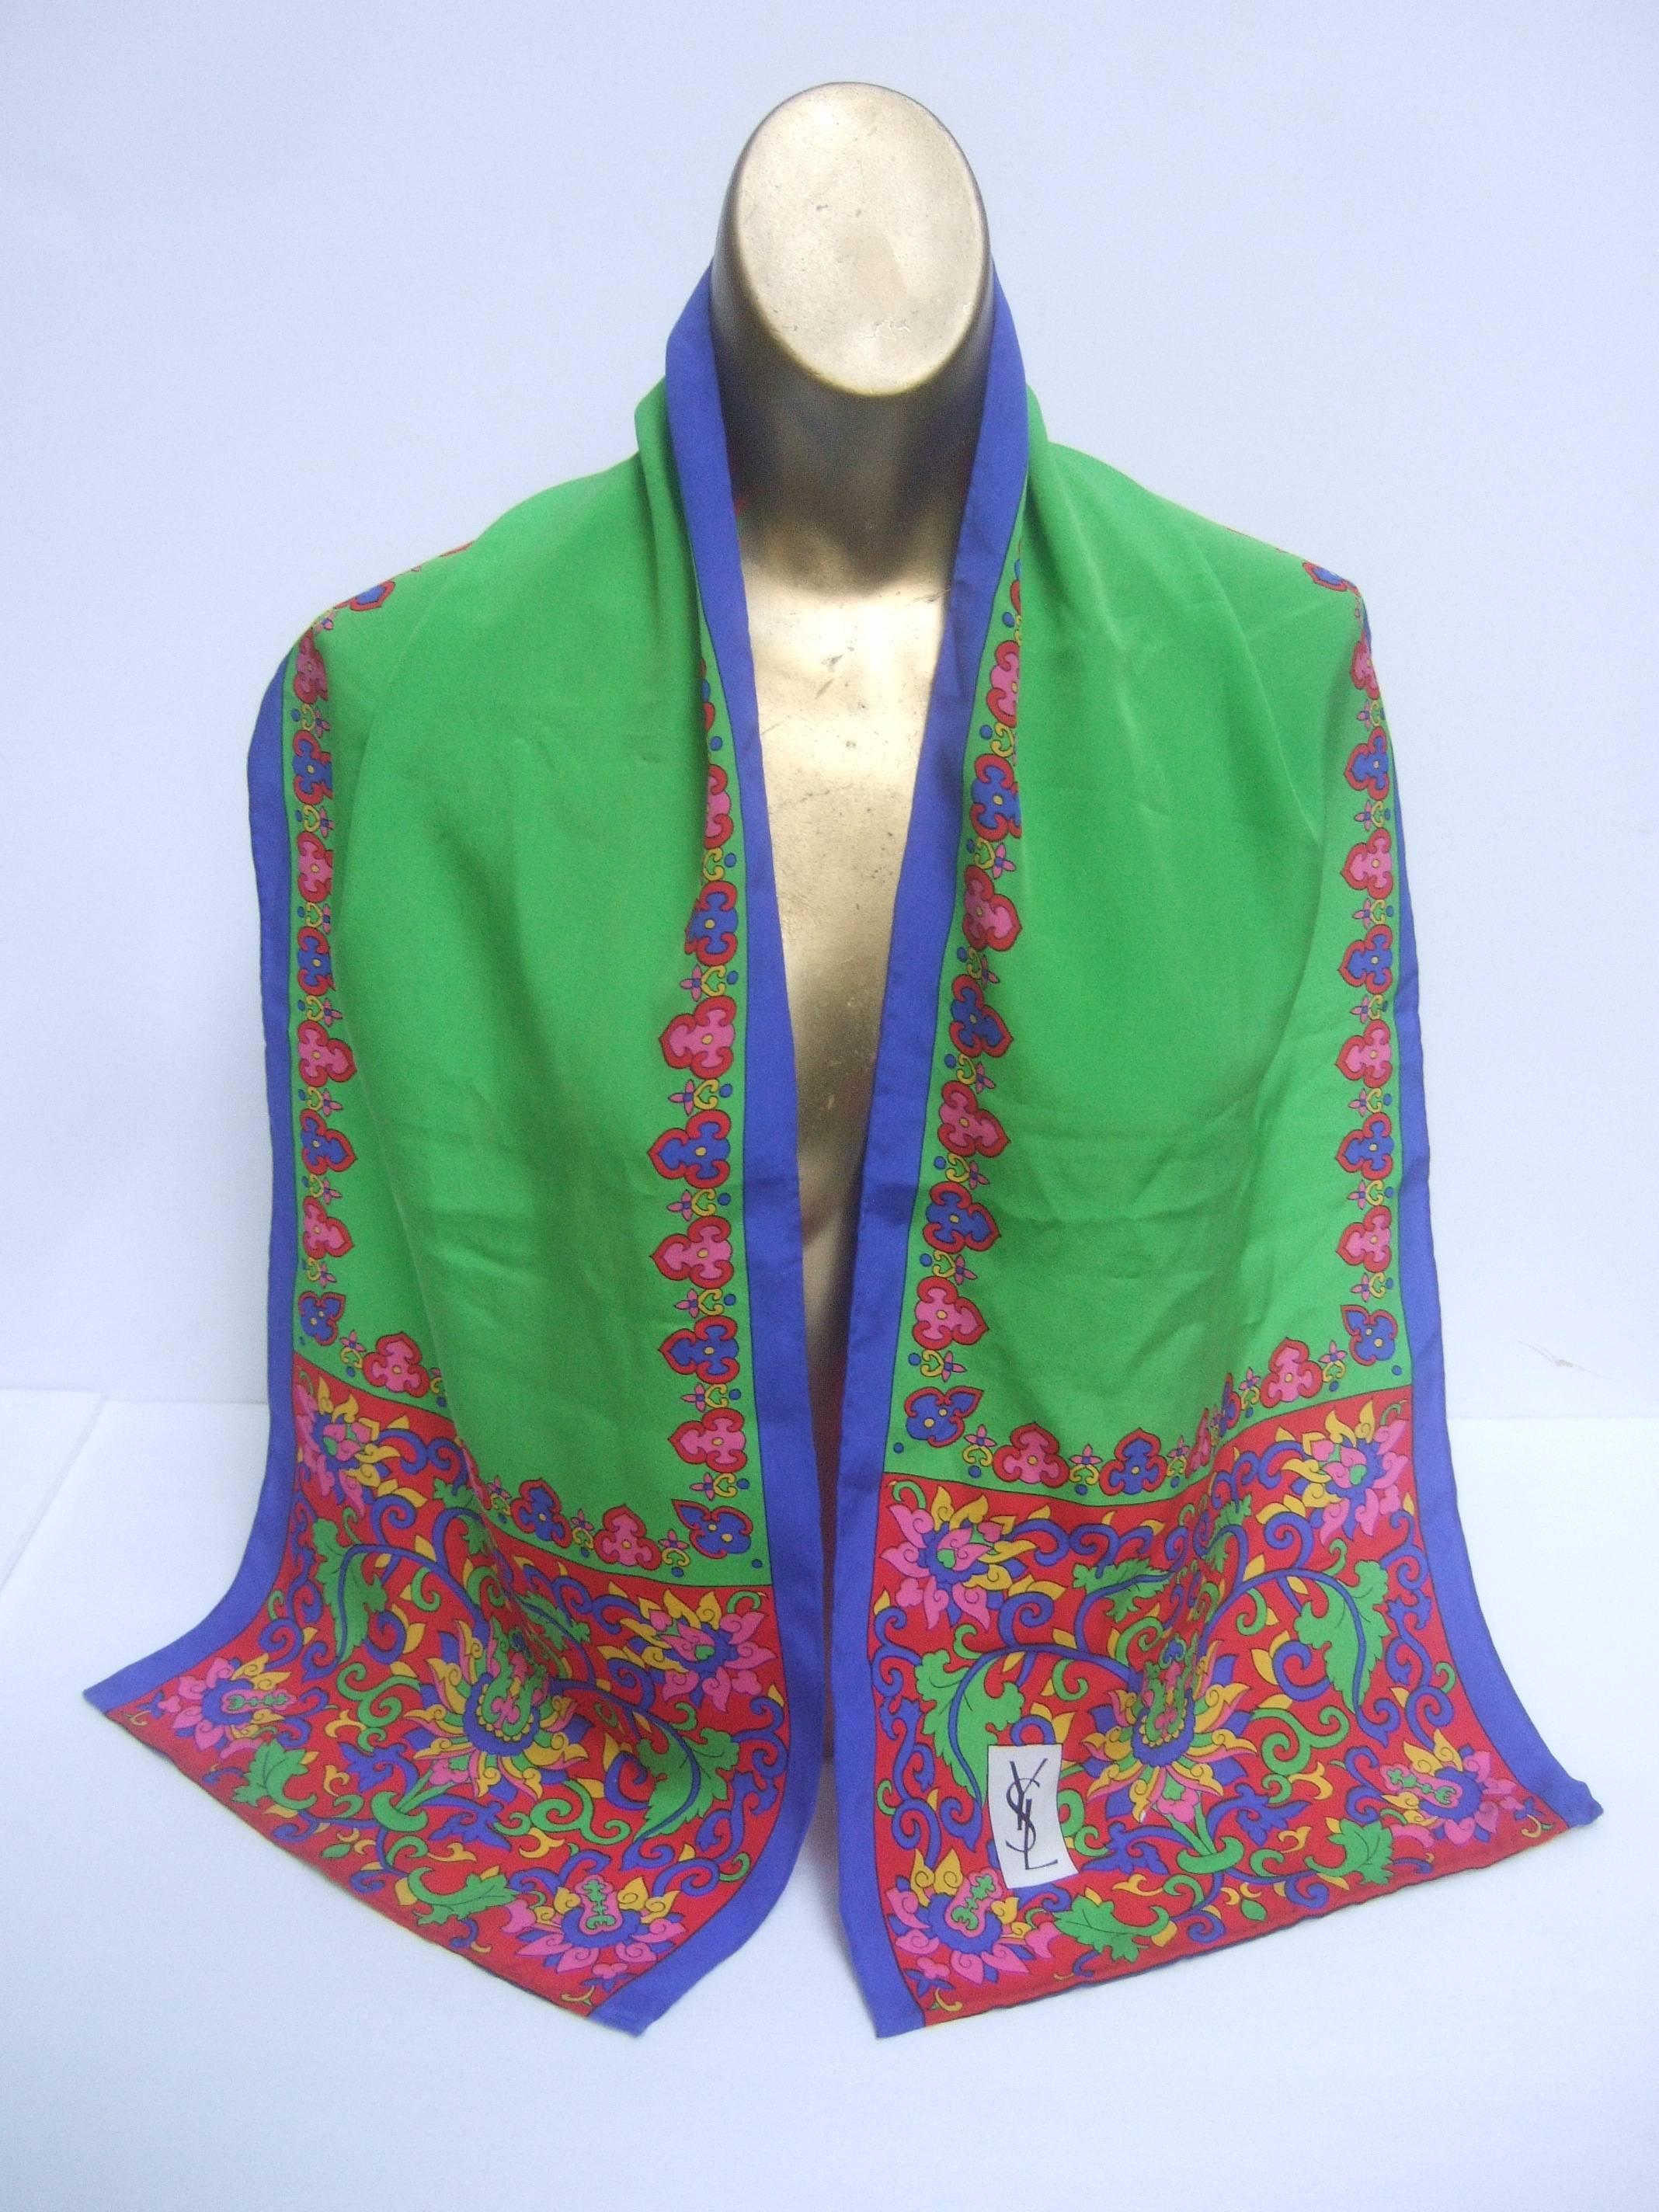 Yves Saint Laurent Silk oblong flower design scarf c 1990
The elegant silk hand rolled scarf is designed with a garden 
of flowers on both ends 

The bright green center panel is framed with a row
floral style graphics. The linear sides are